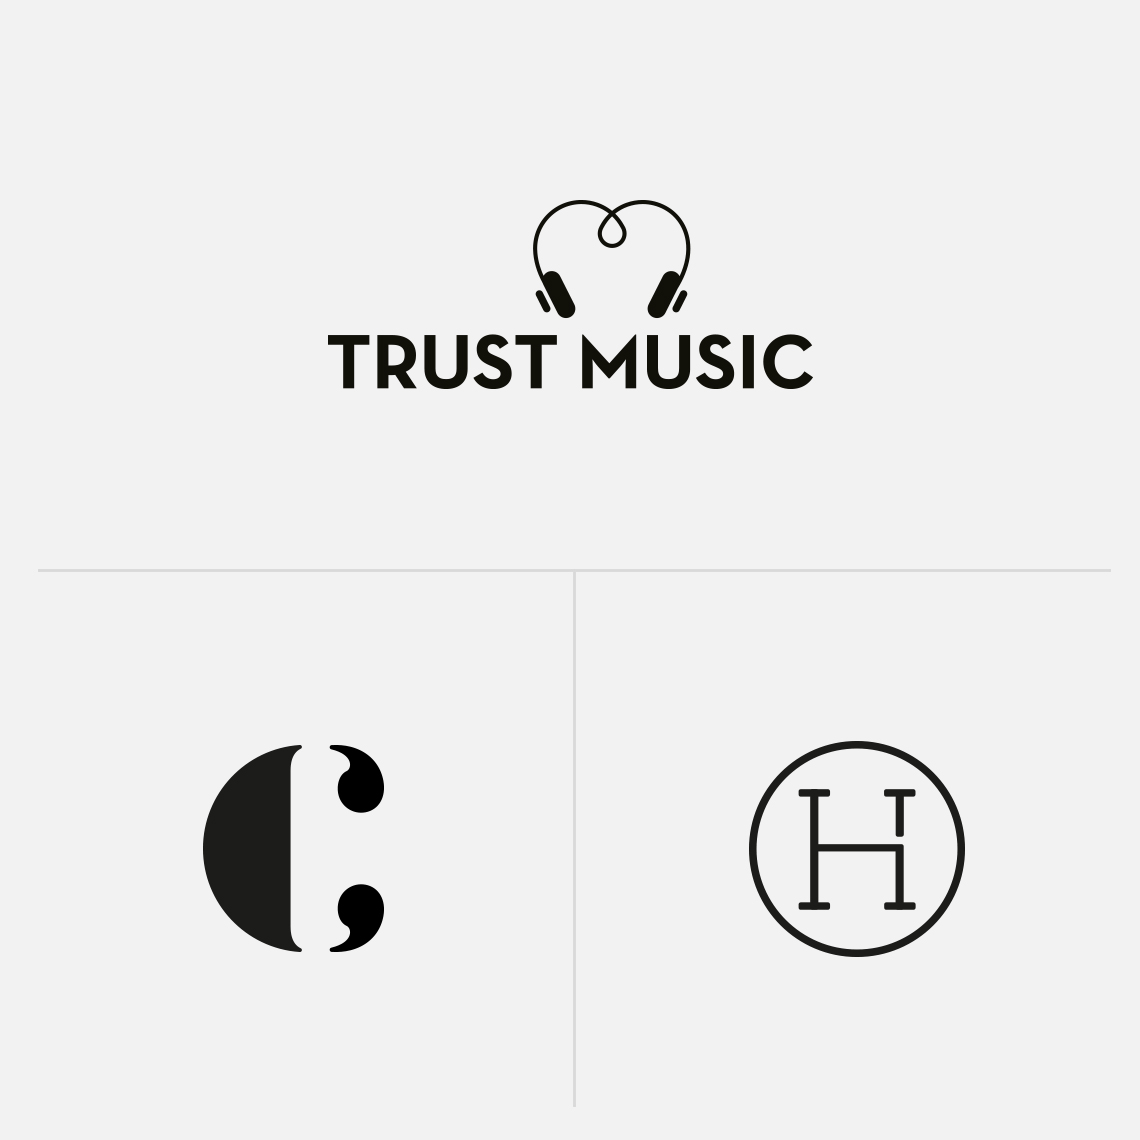 Trust Music Clive Steeper House of Thobes Brand Identity